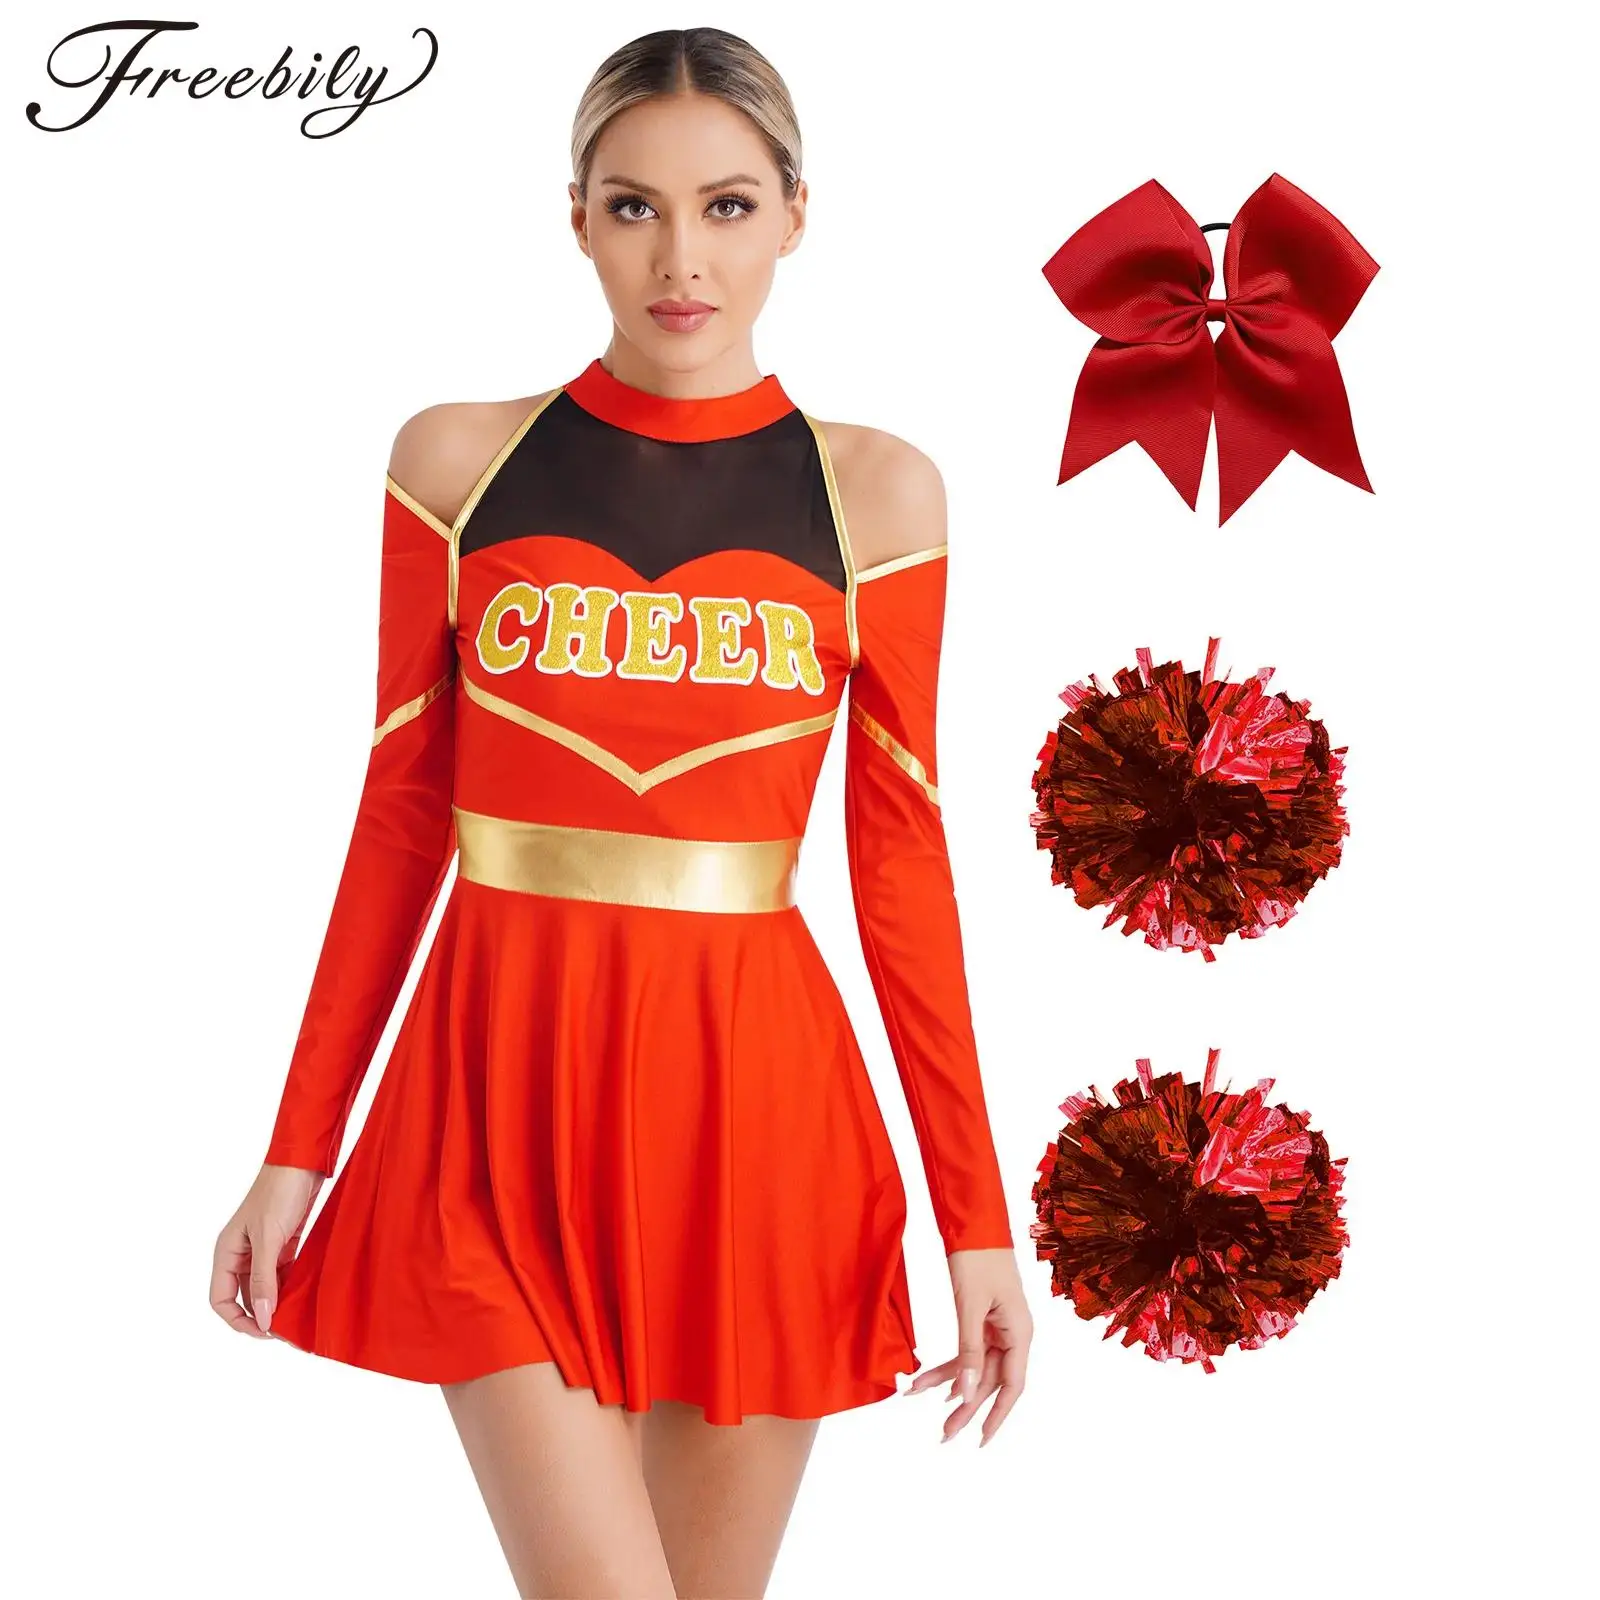 

Women Cheerleading Dance Performance Costume Cold Shoulders Dress with Hair Band Flower Balls for Basketball Match Cosplay Party